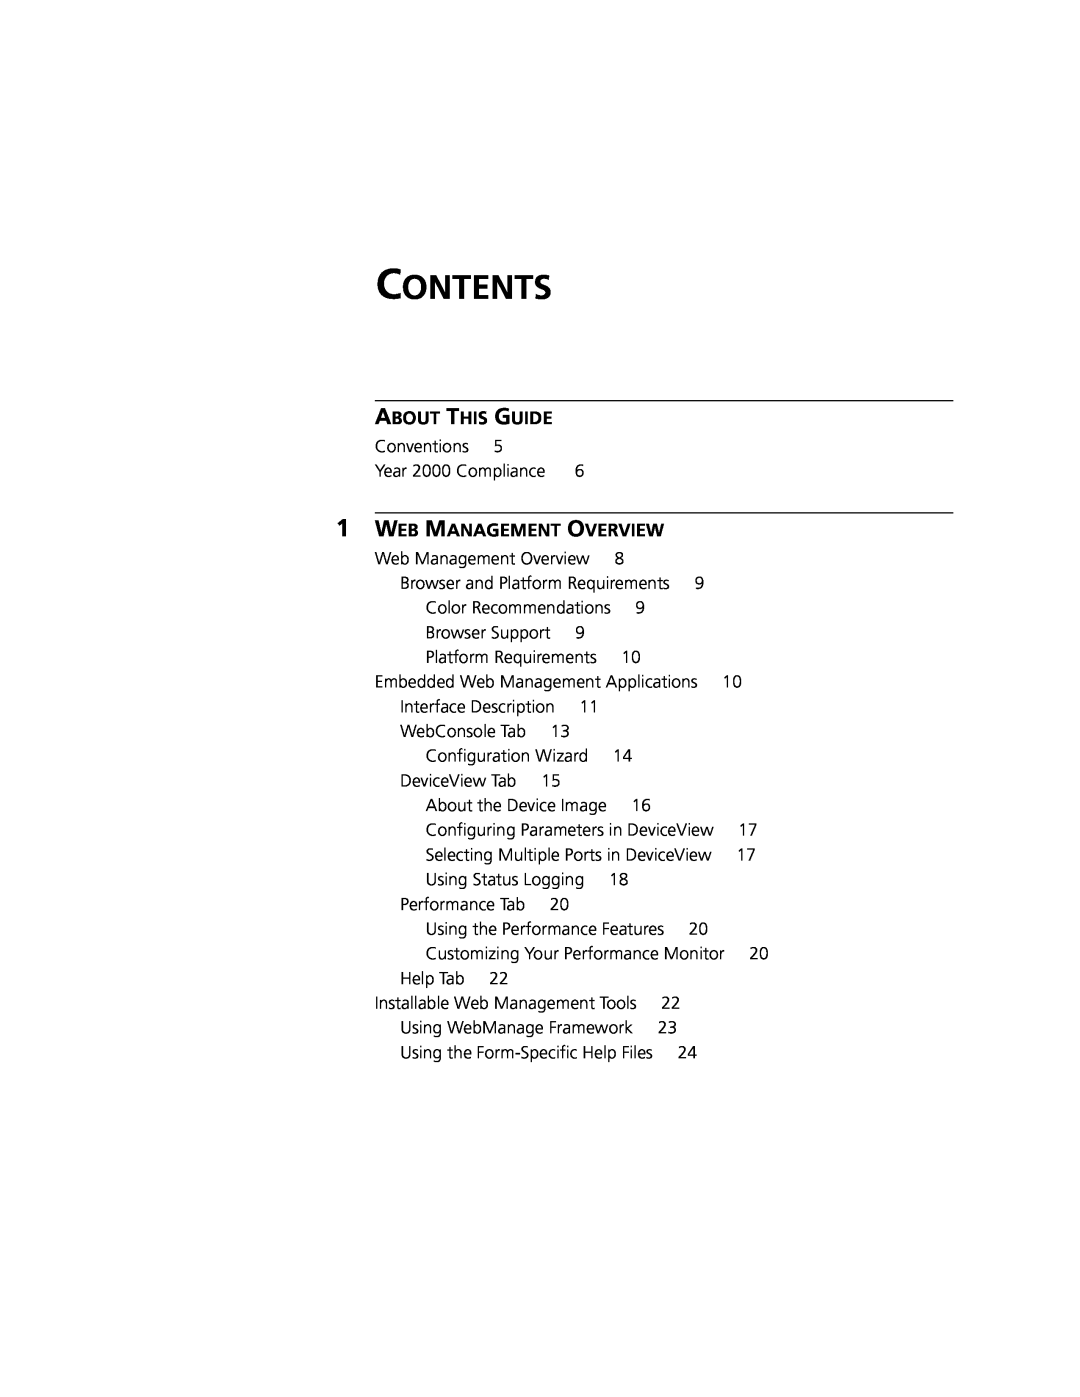 3Com 3900 manual Contents, About This Guide, Web Management Overview 